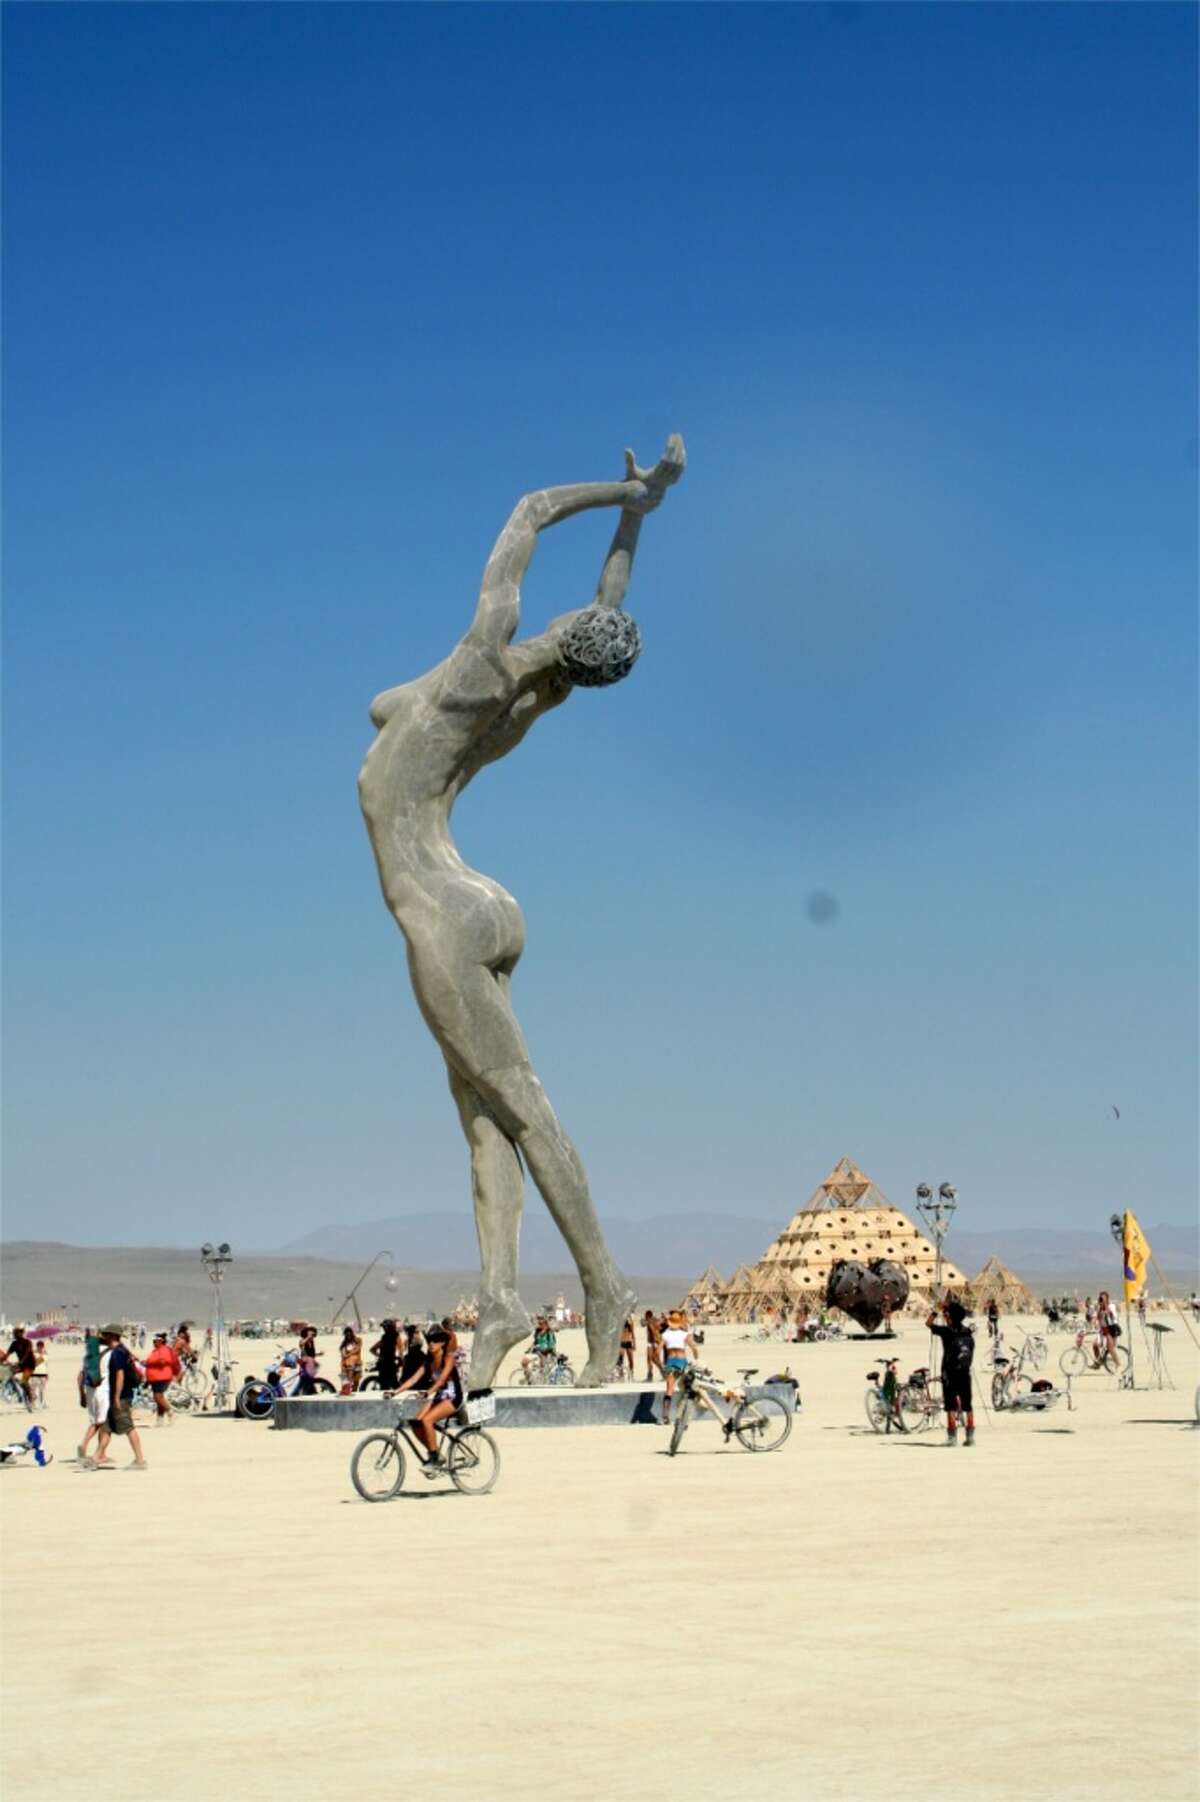 Truth Is Beauty: A 55-Foot Tall Woman… Burning Man 2013 